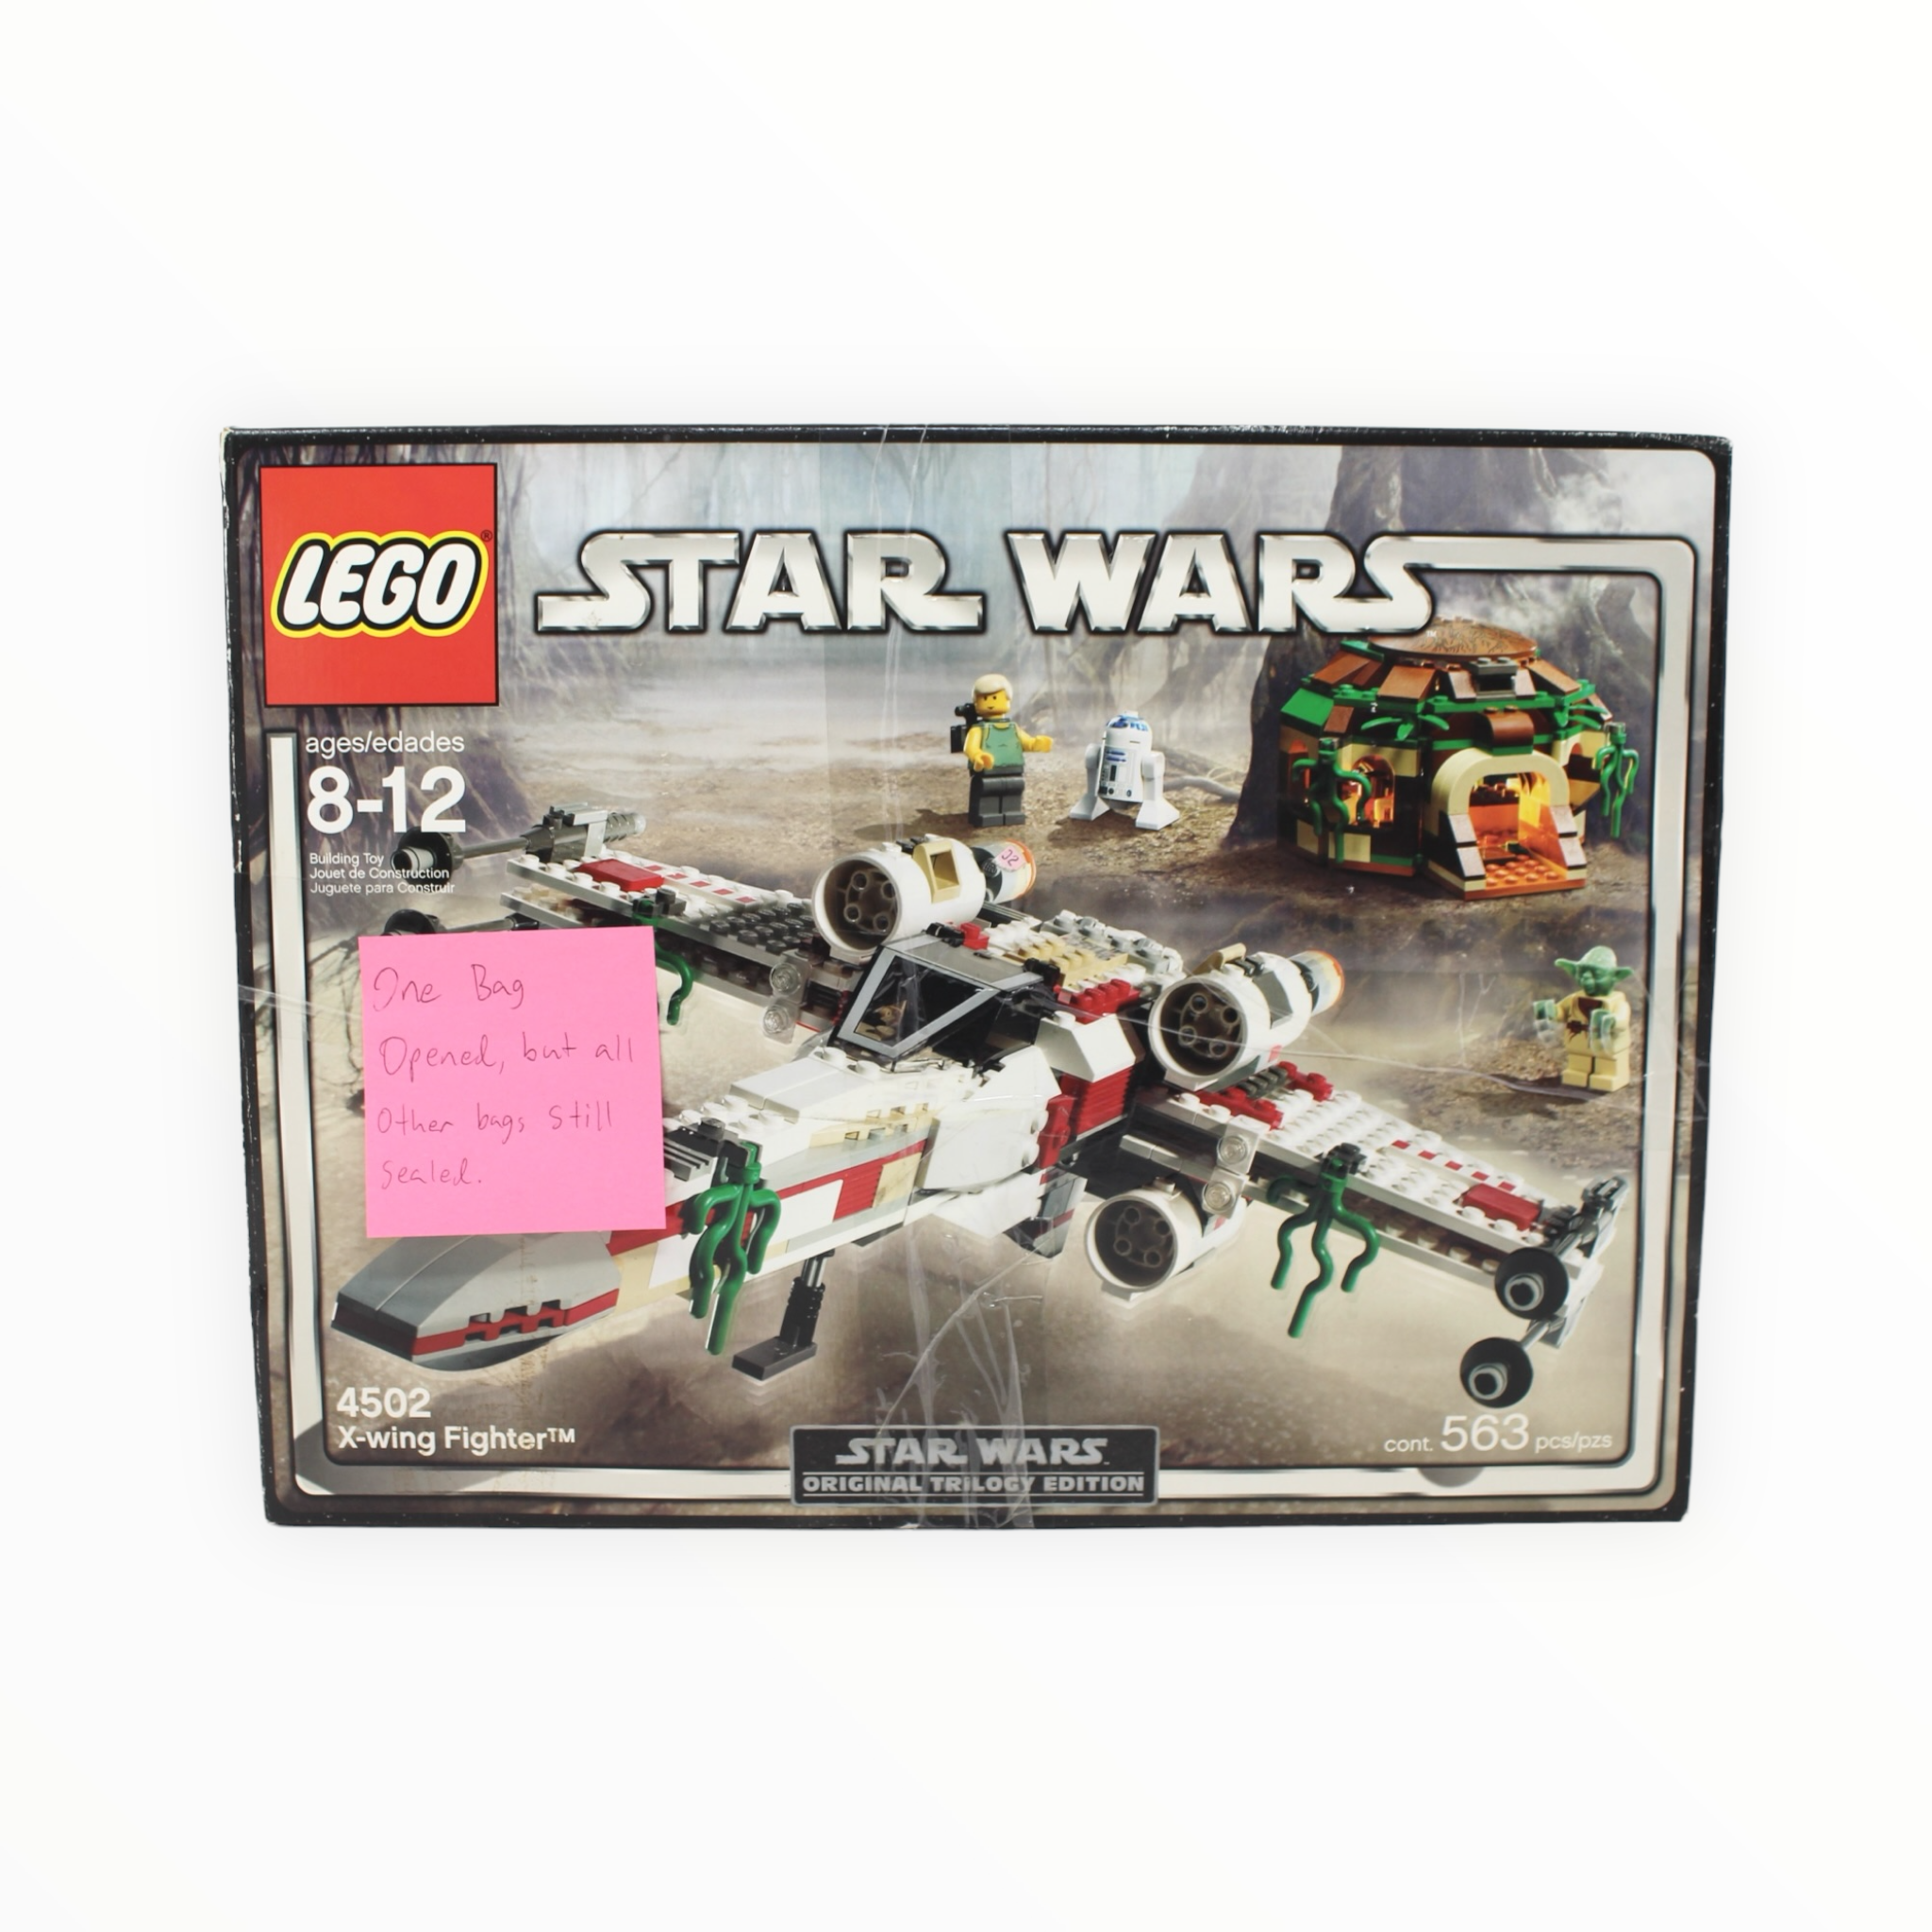 Certified Used 4502 Star Wars X-wing Fighter Tr